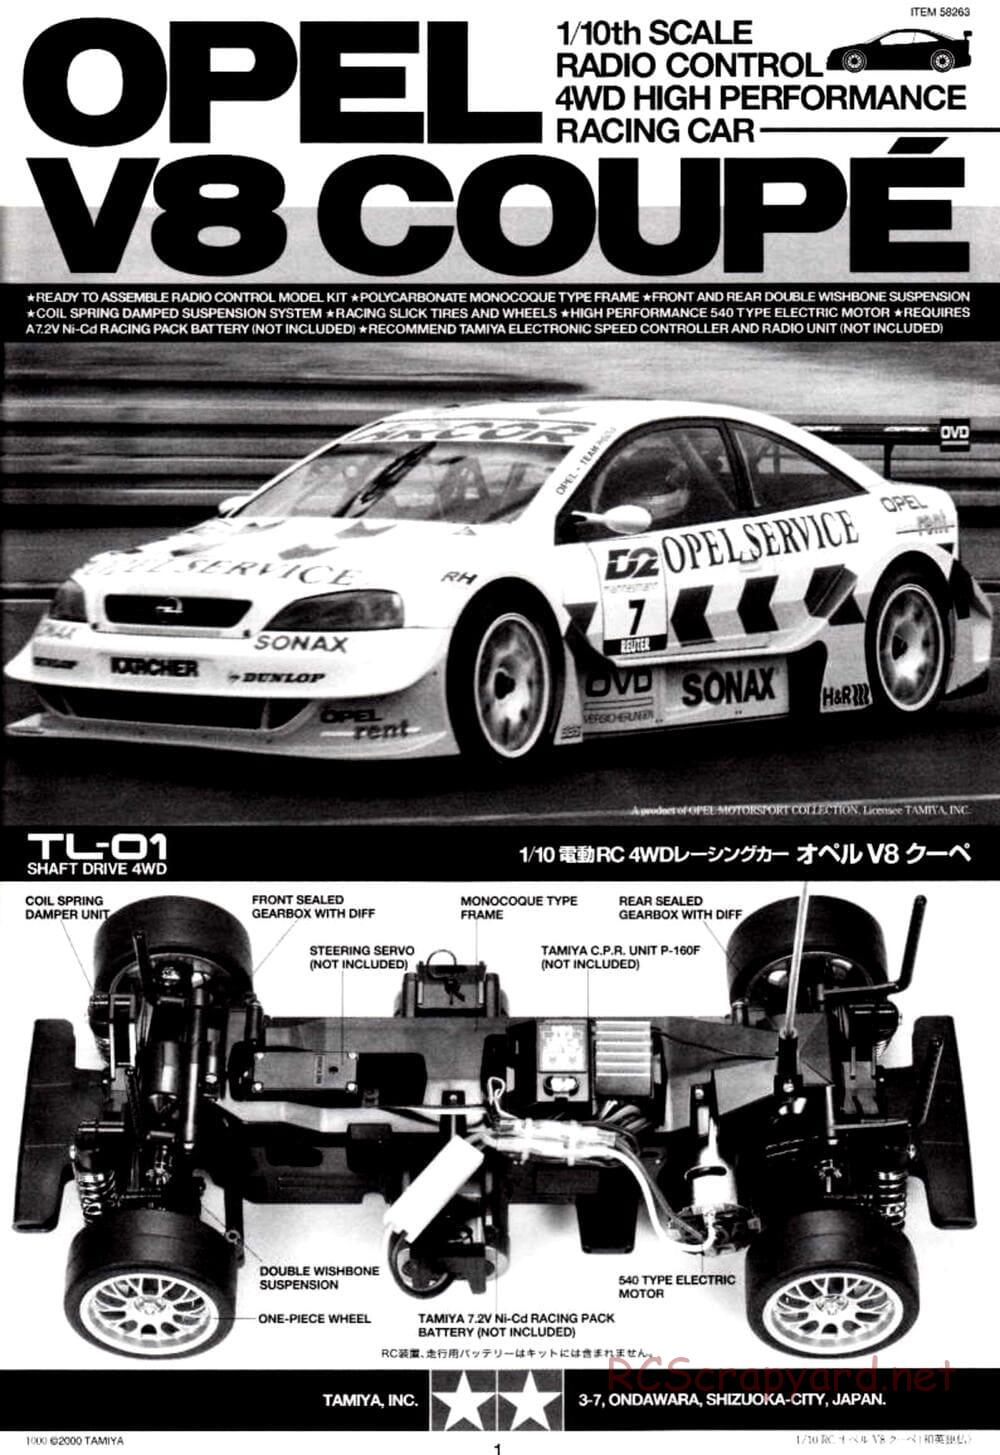 Tamiya - Opel V8 Coupe - TL-01 Chassis - Manual - Page 1